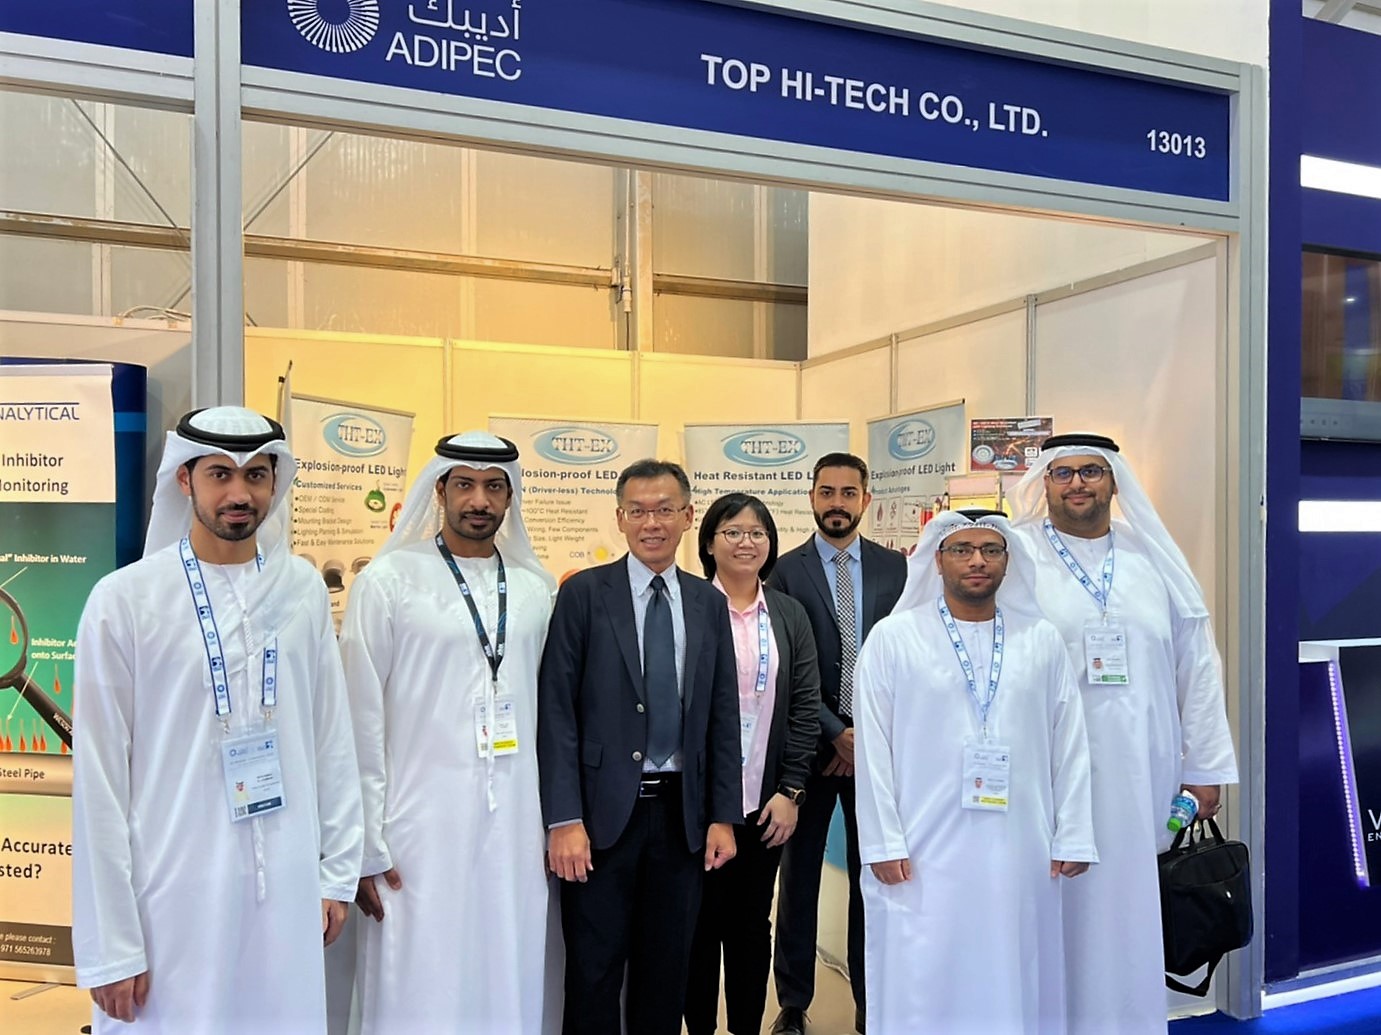 Thanks for Visiting THT-EX Booth at ADIPEC 2022!